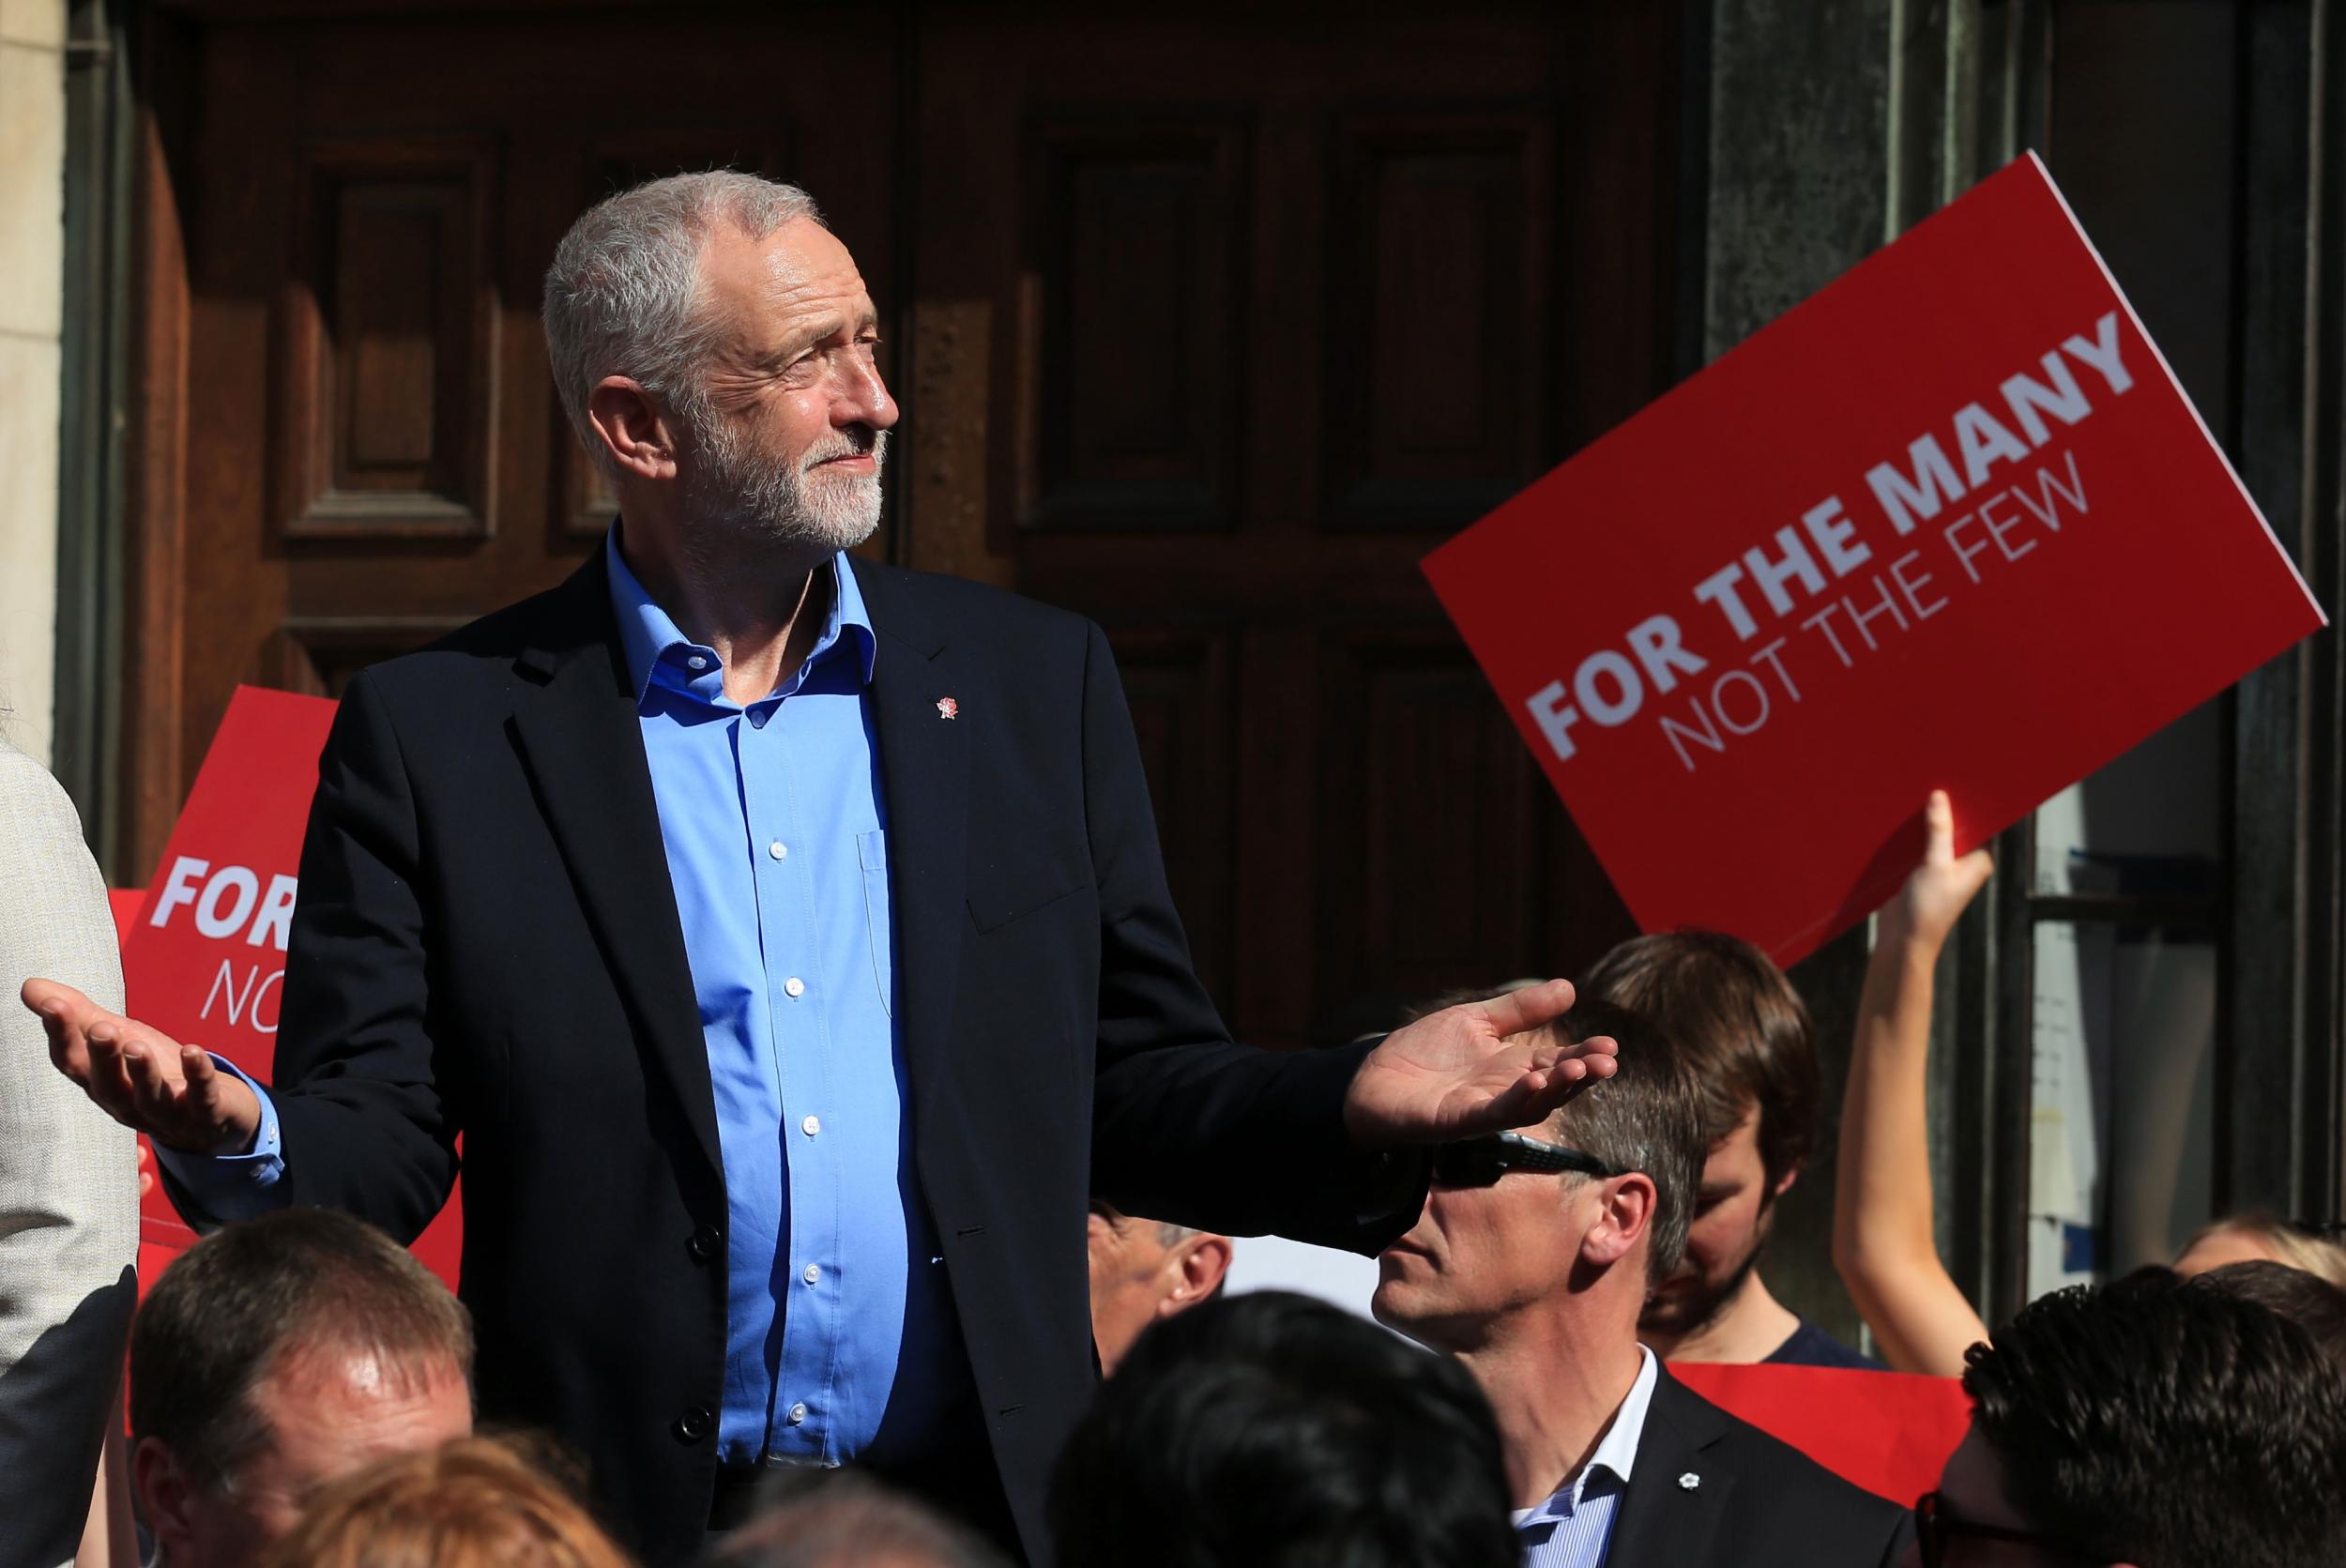 Jeremy Corbyn addresses supporters at a general election campaign visit in York